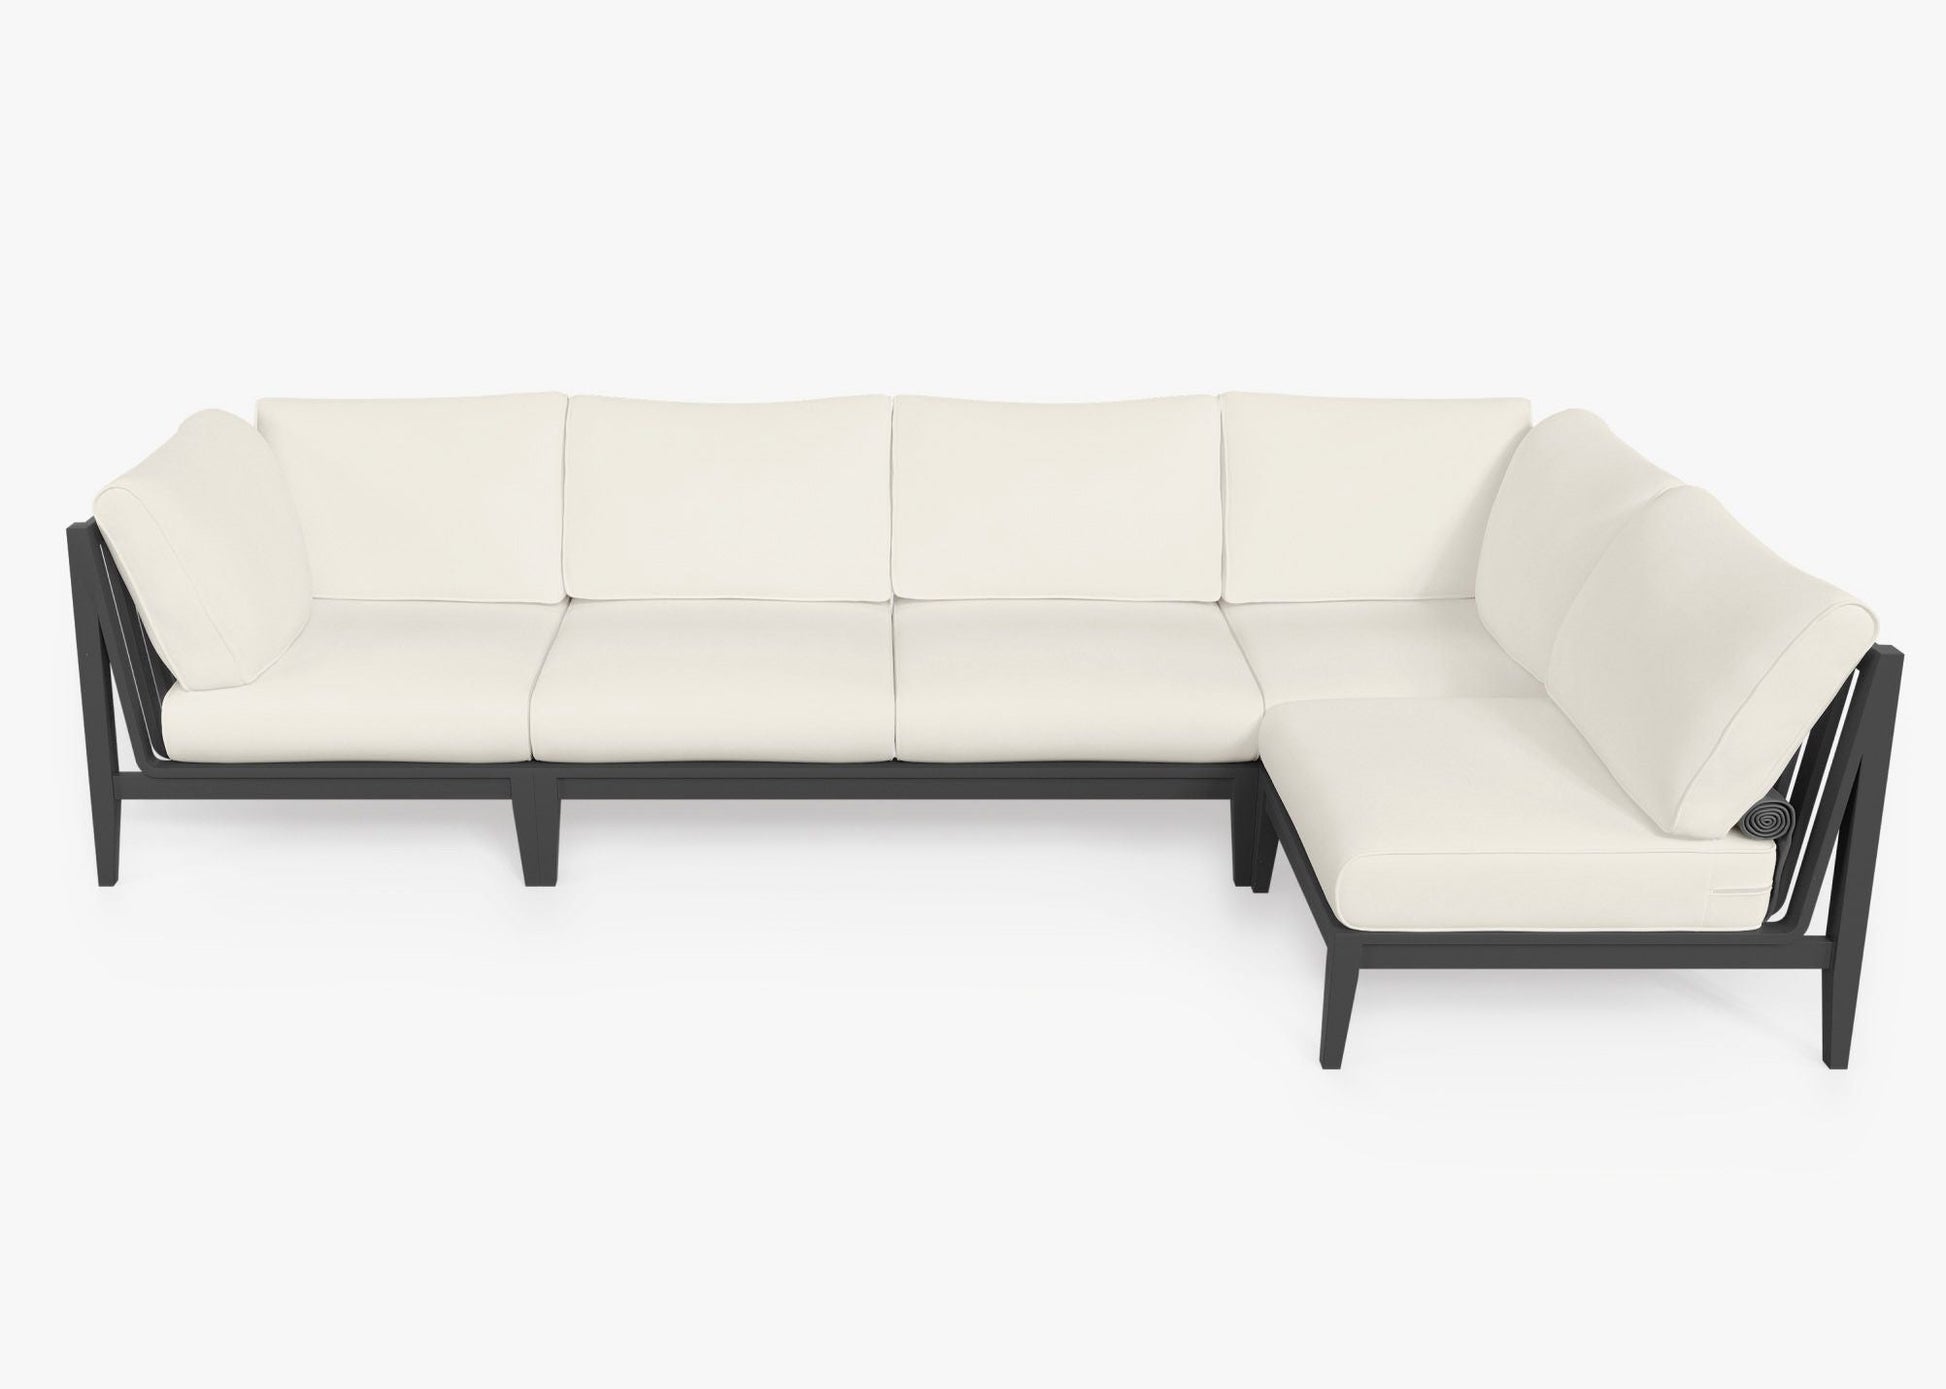 Live Outer 127" x 64" Charcoal Aluminum Outdoor L Shape Sectional 5-Seat With Palisades Cream Cushion